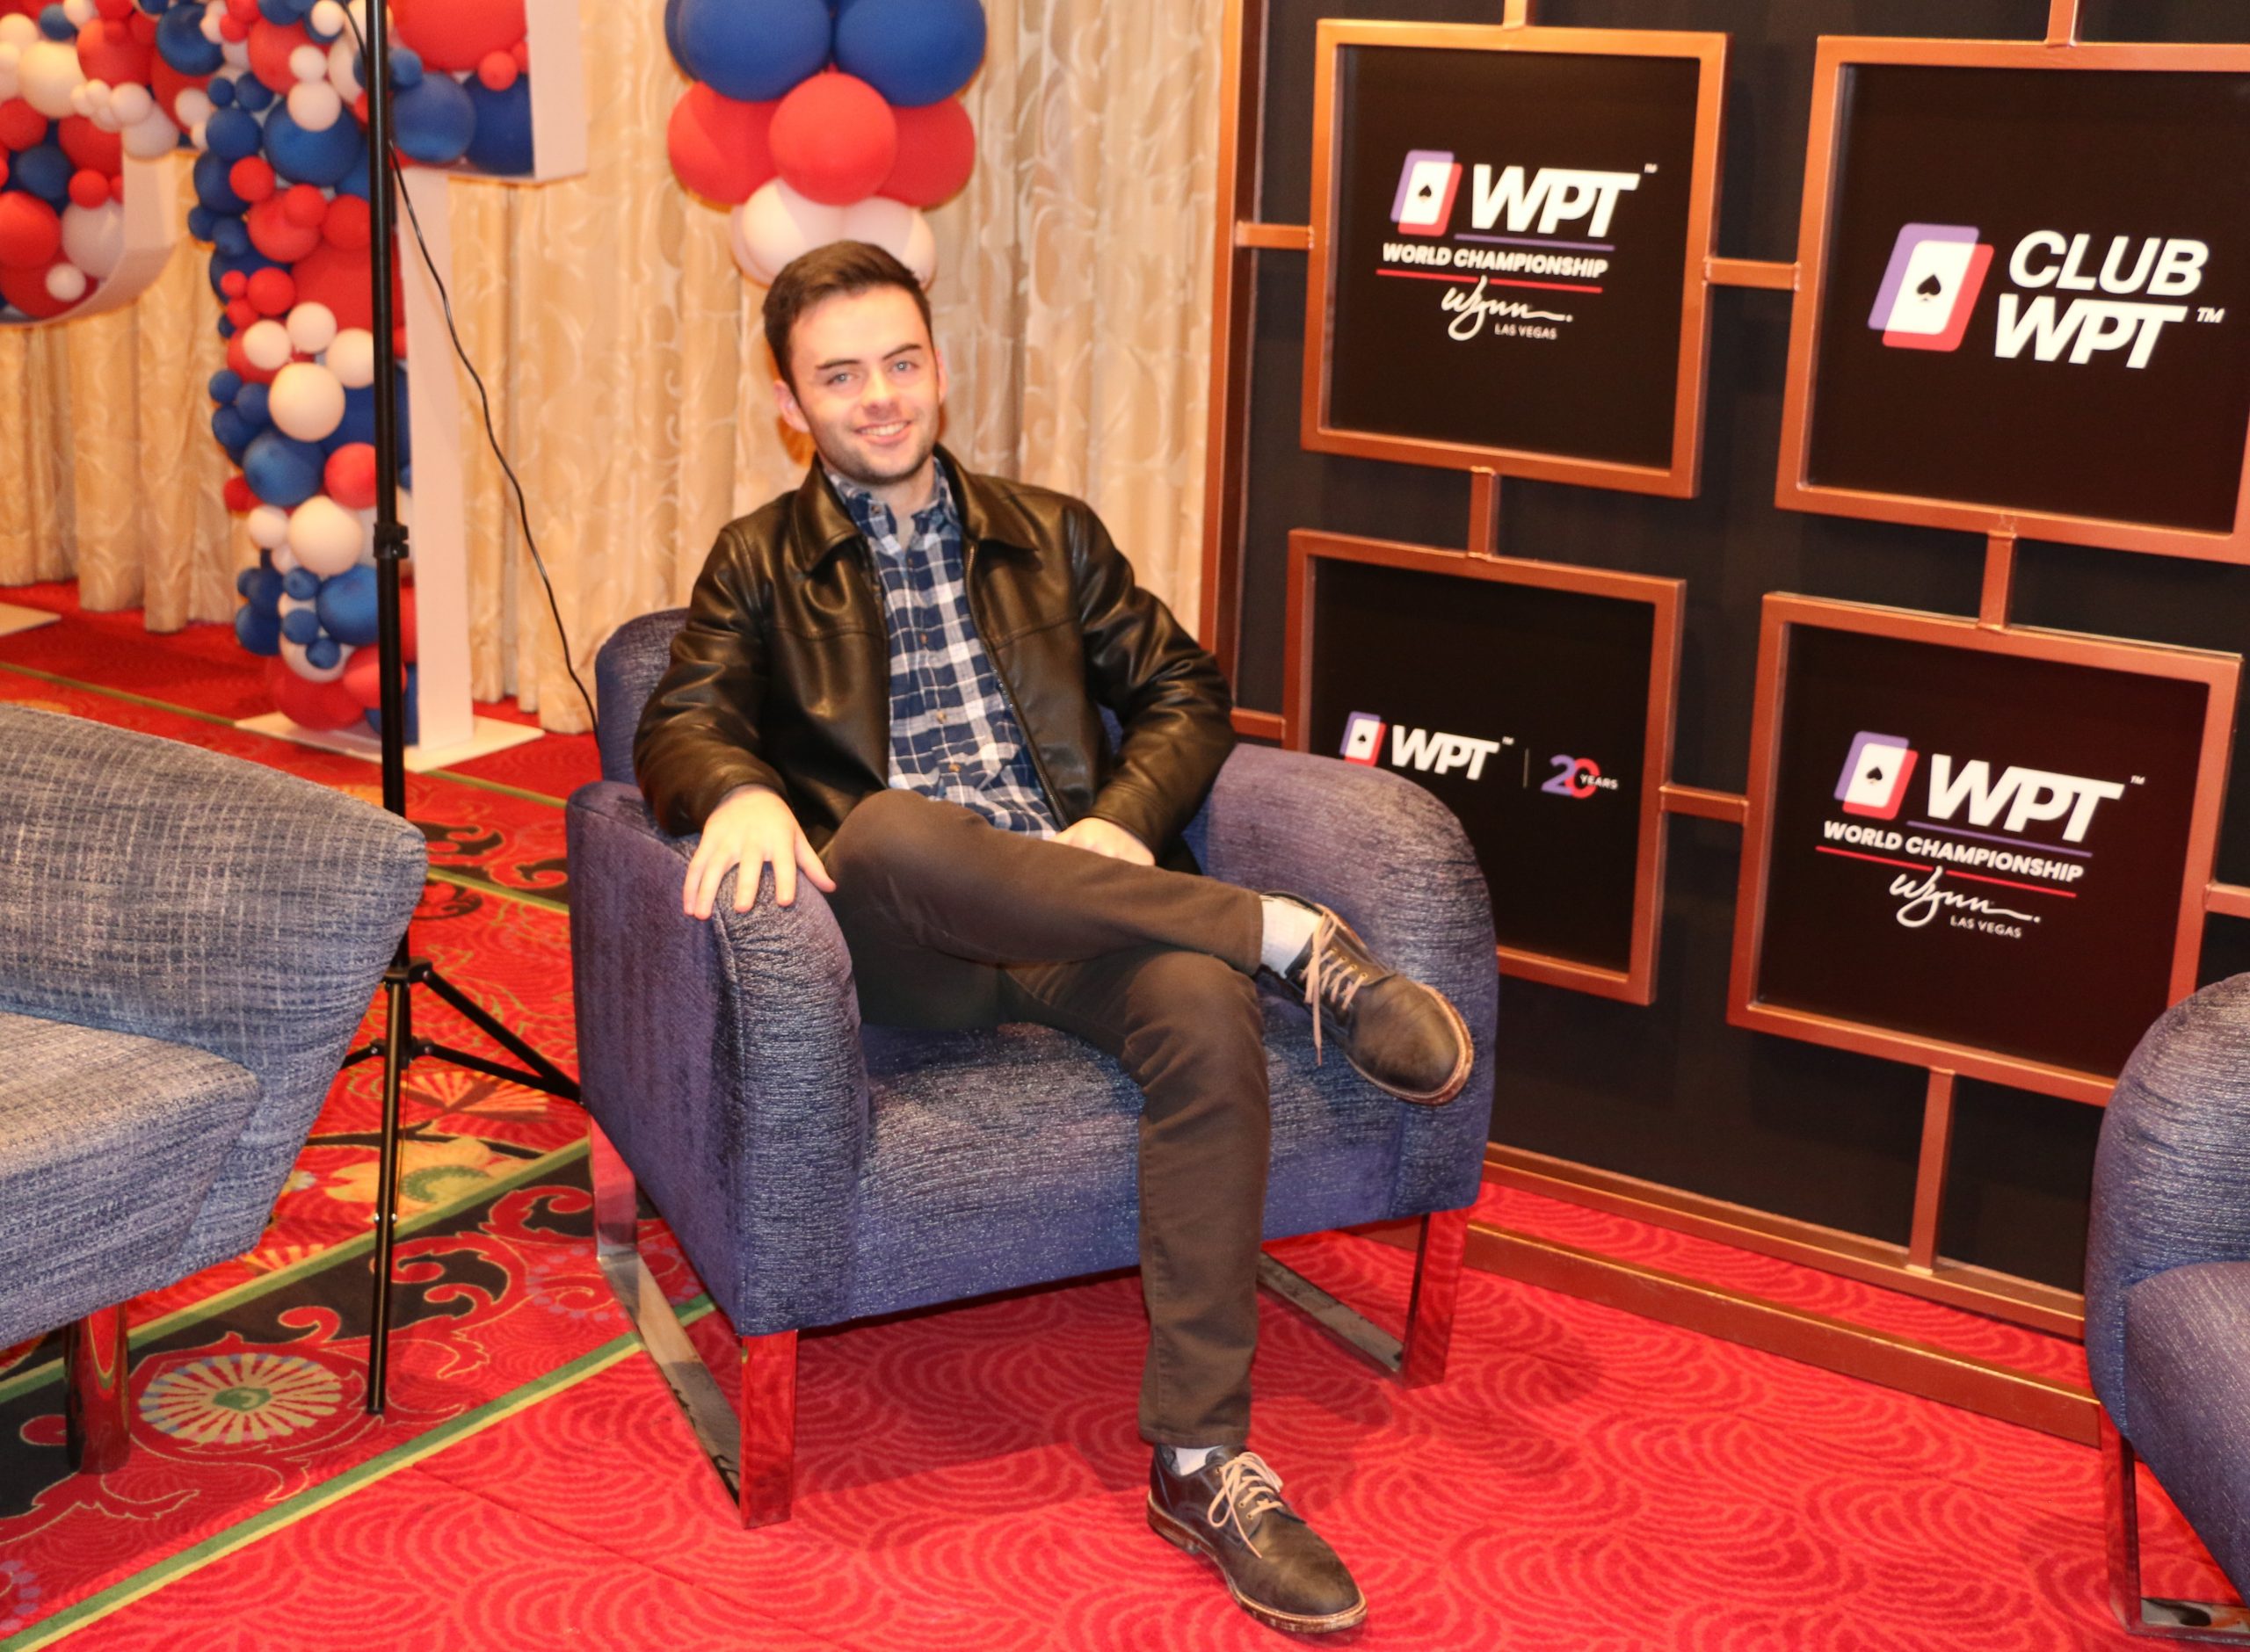 WPT World Championship Stories: Liam Gannon – “I Don’t Remember a WPT Being this Big”